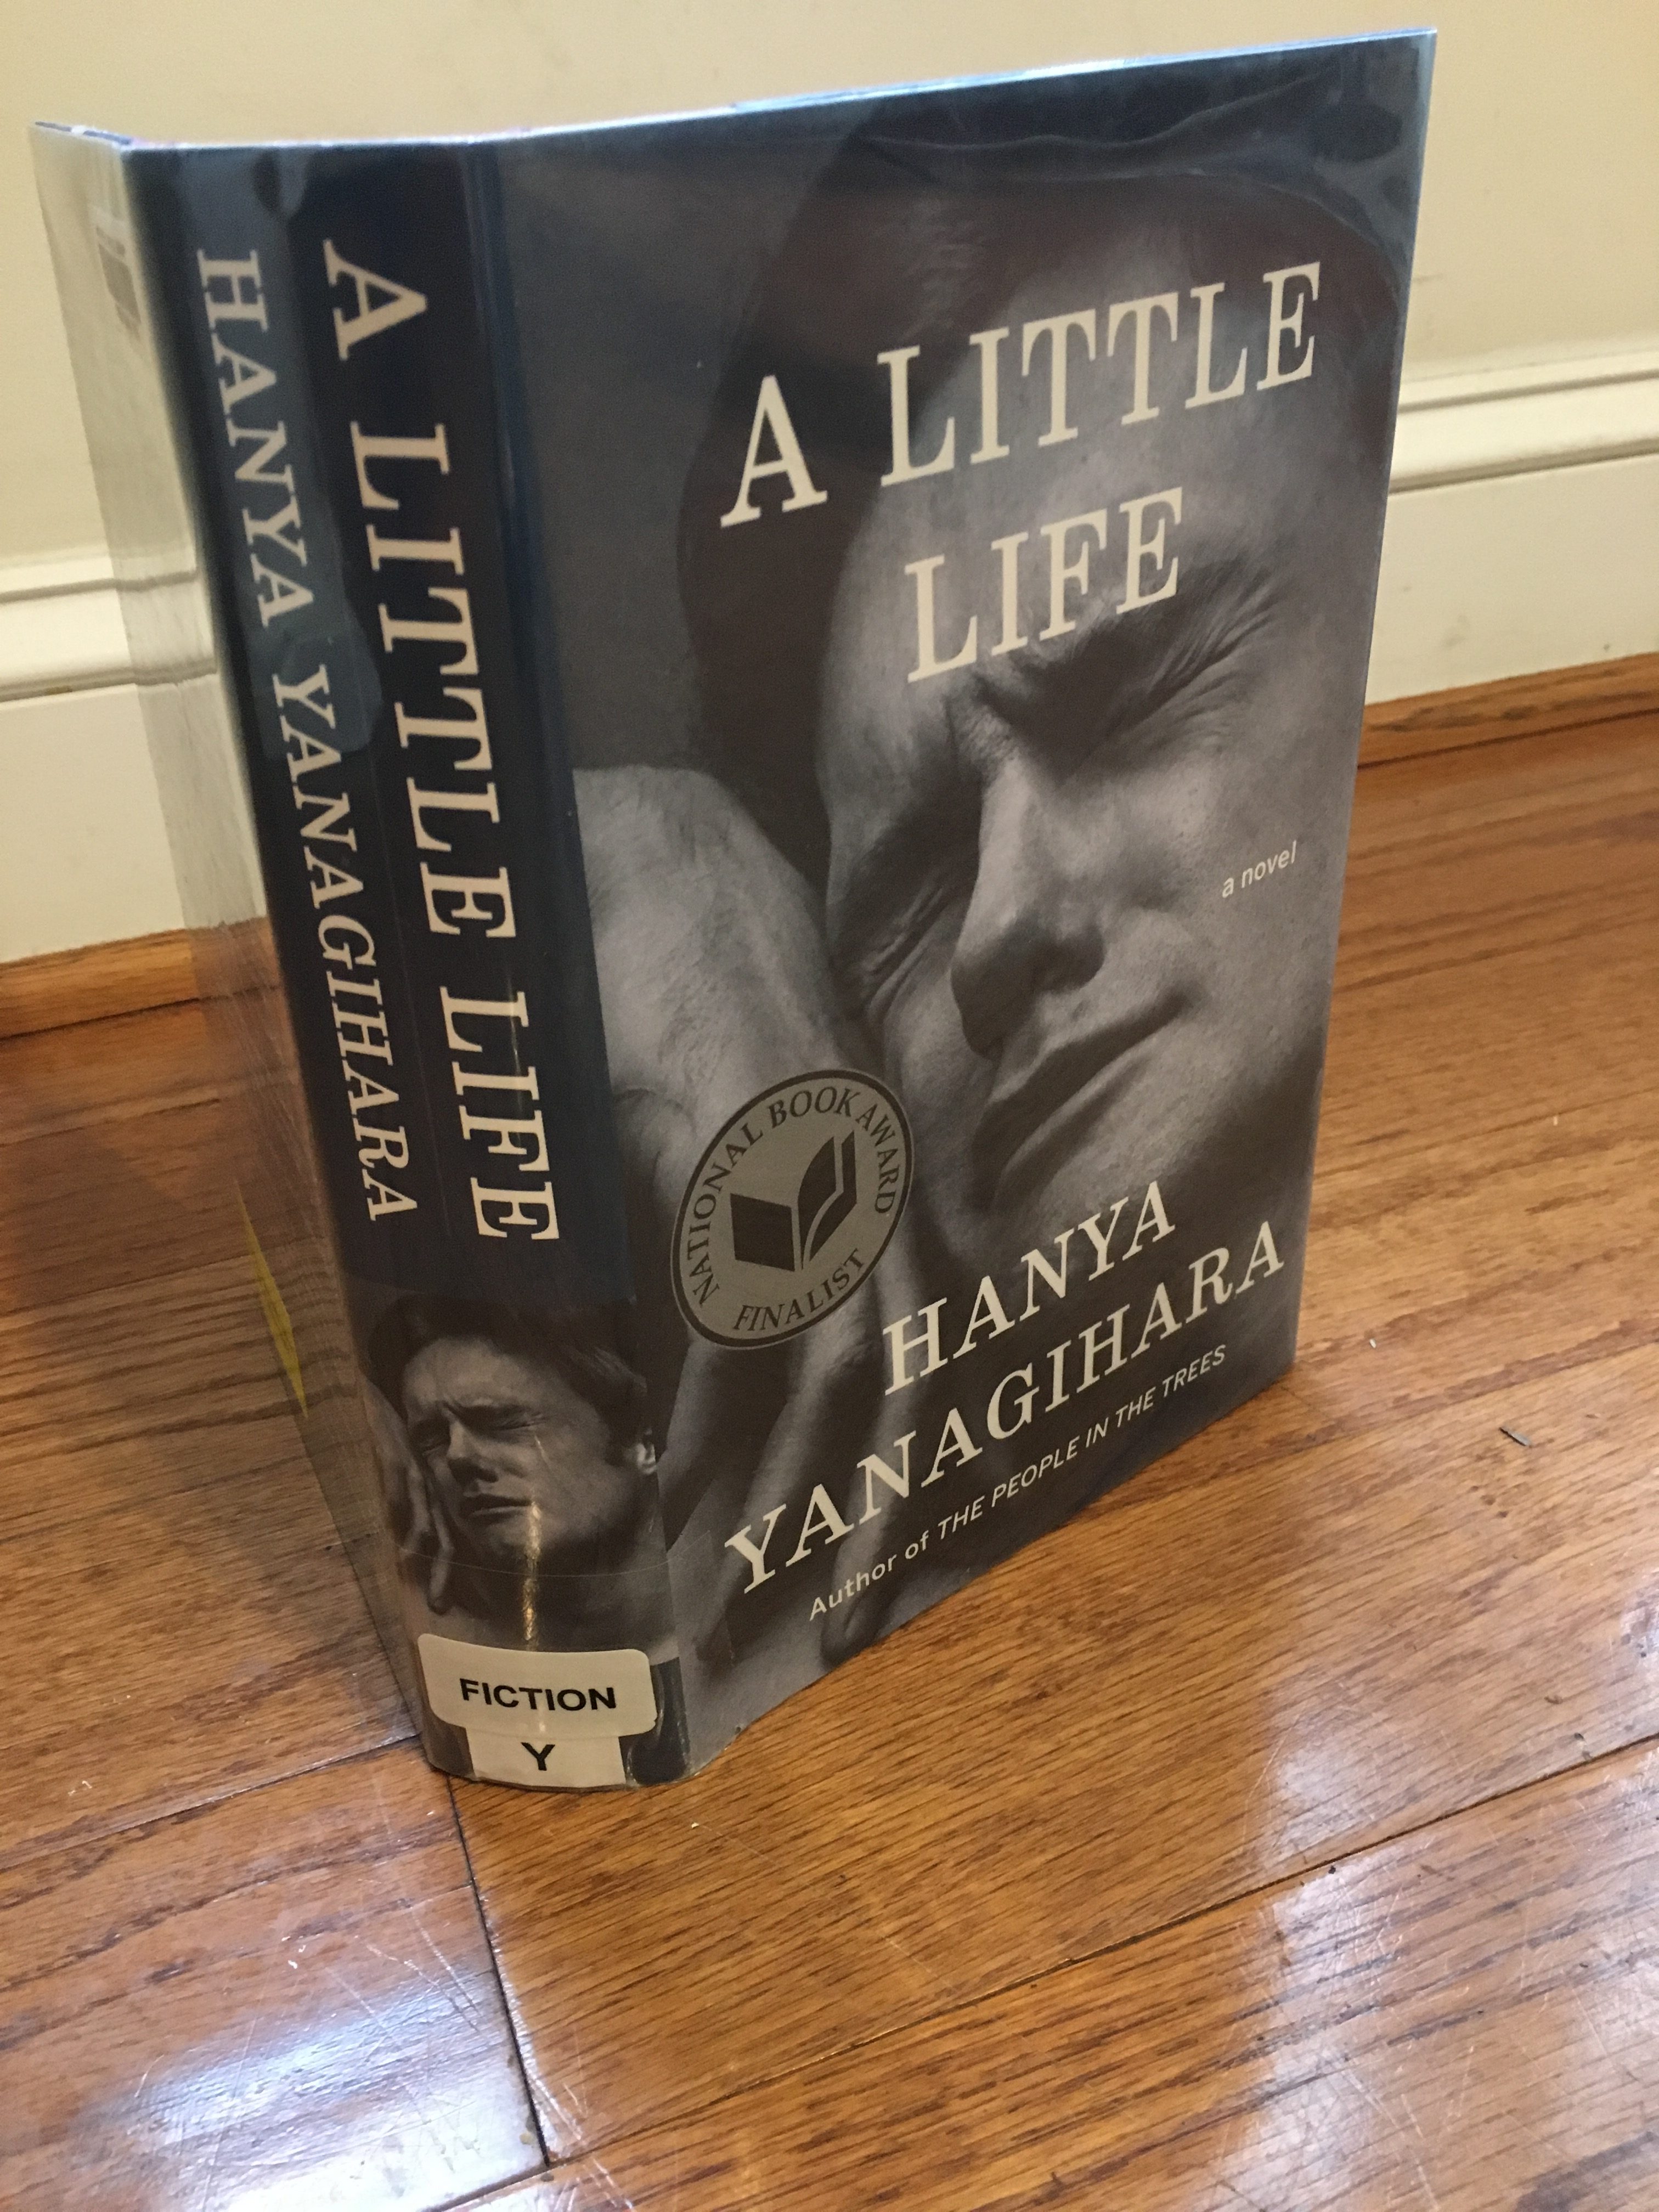 A Little Life, the library version